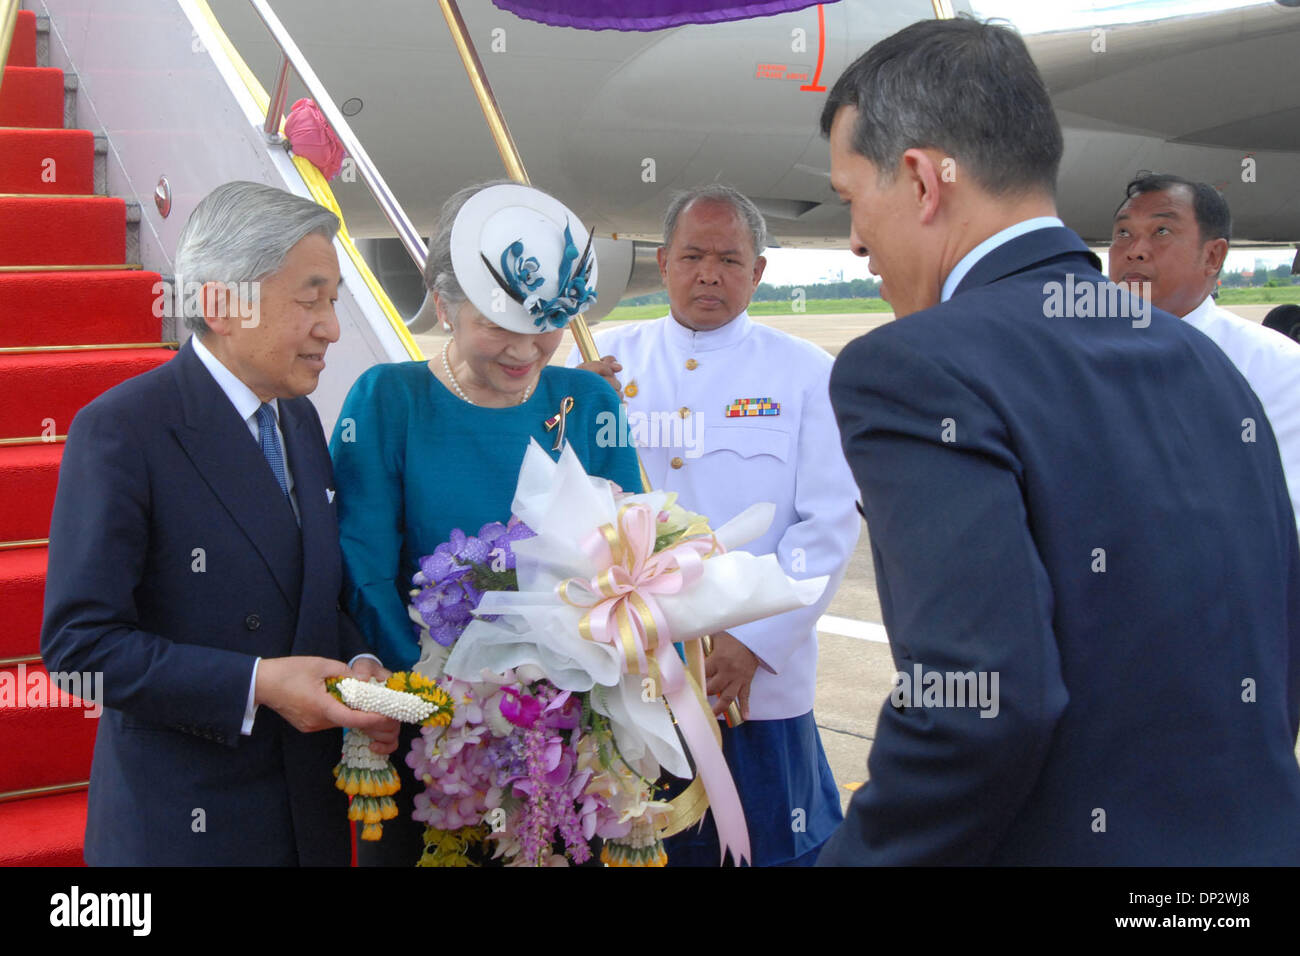 Jun 11, 2006; Bangkok, THAILAND; His Majesty Emperor Akihito & Her Majesety Empress Michiko of Japan arrive at Bangkok Military Airport to join the King of Thailand's 60th Anniversary celebrations. Royal guests from 25 nations are expected to arrive in Bangkok for His Majesty King Bumibol Adulyadej's 60th Anniversary on the Throne celebrations. On Monday the 12th the royal guests w Stock Photo